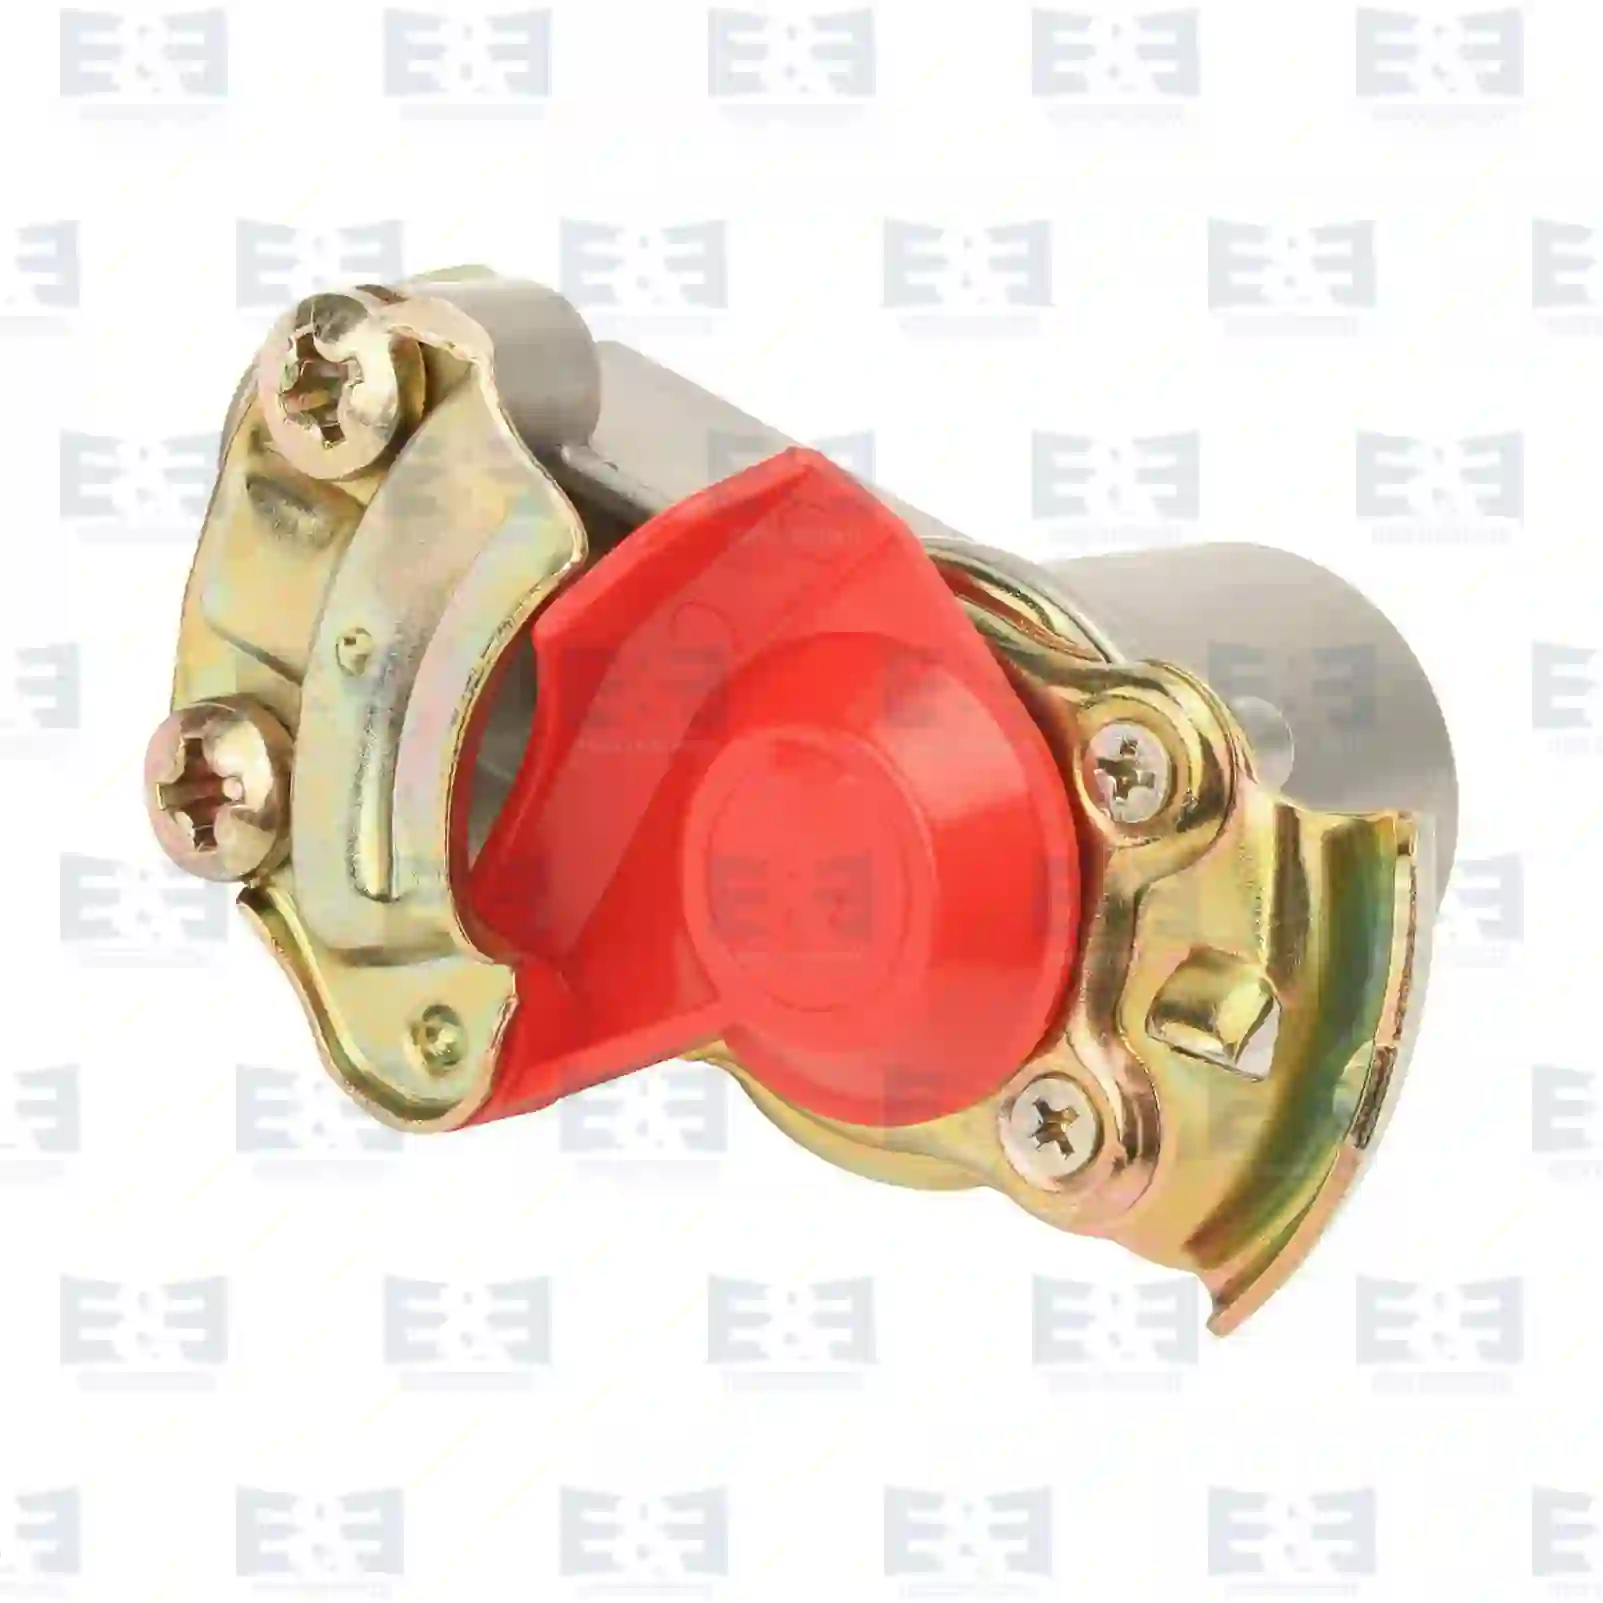 Compressed Air Palm coupling, red lid, with pipe filter, EE No 2E2285661 ,  oem no:1518207, 21151103102, 6500330, 6500332, 505820328, 5058203280, 5820328, 81998062076, AIF1175, 1788946, 1020772, 55105, 10896059 E&E Truck Spare Parts | Truck Spare Parts, Auotomotive Spare Parts